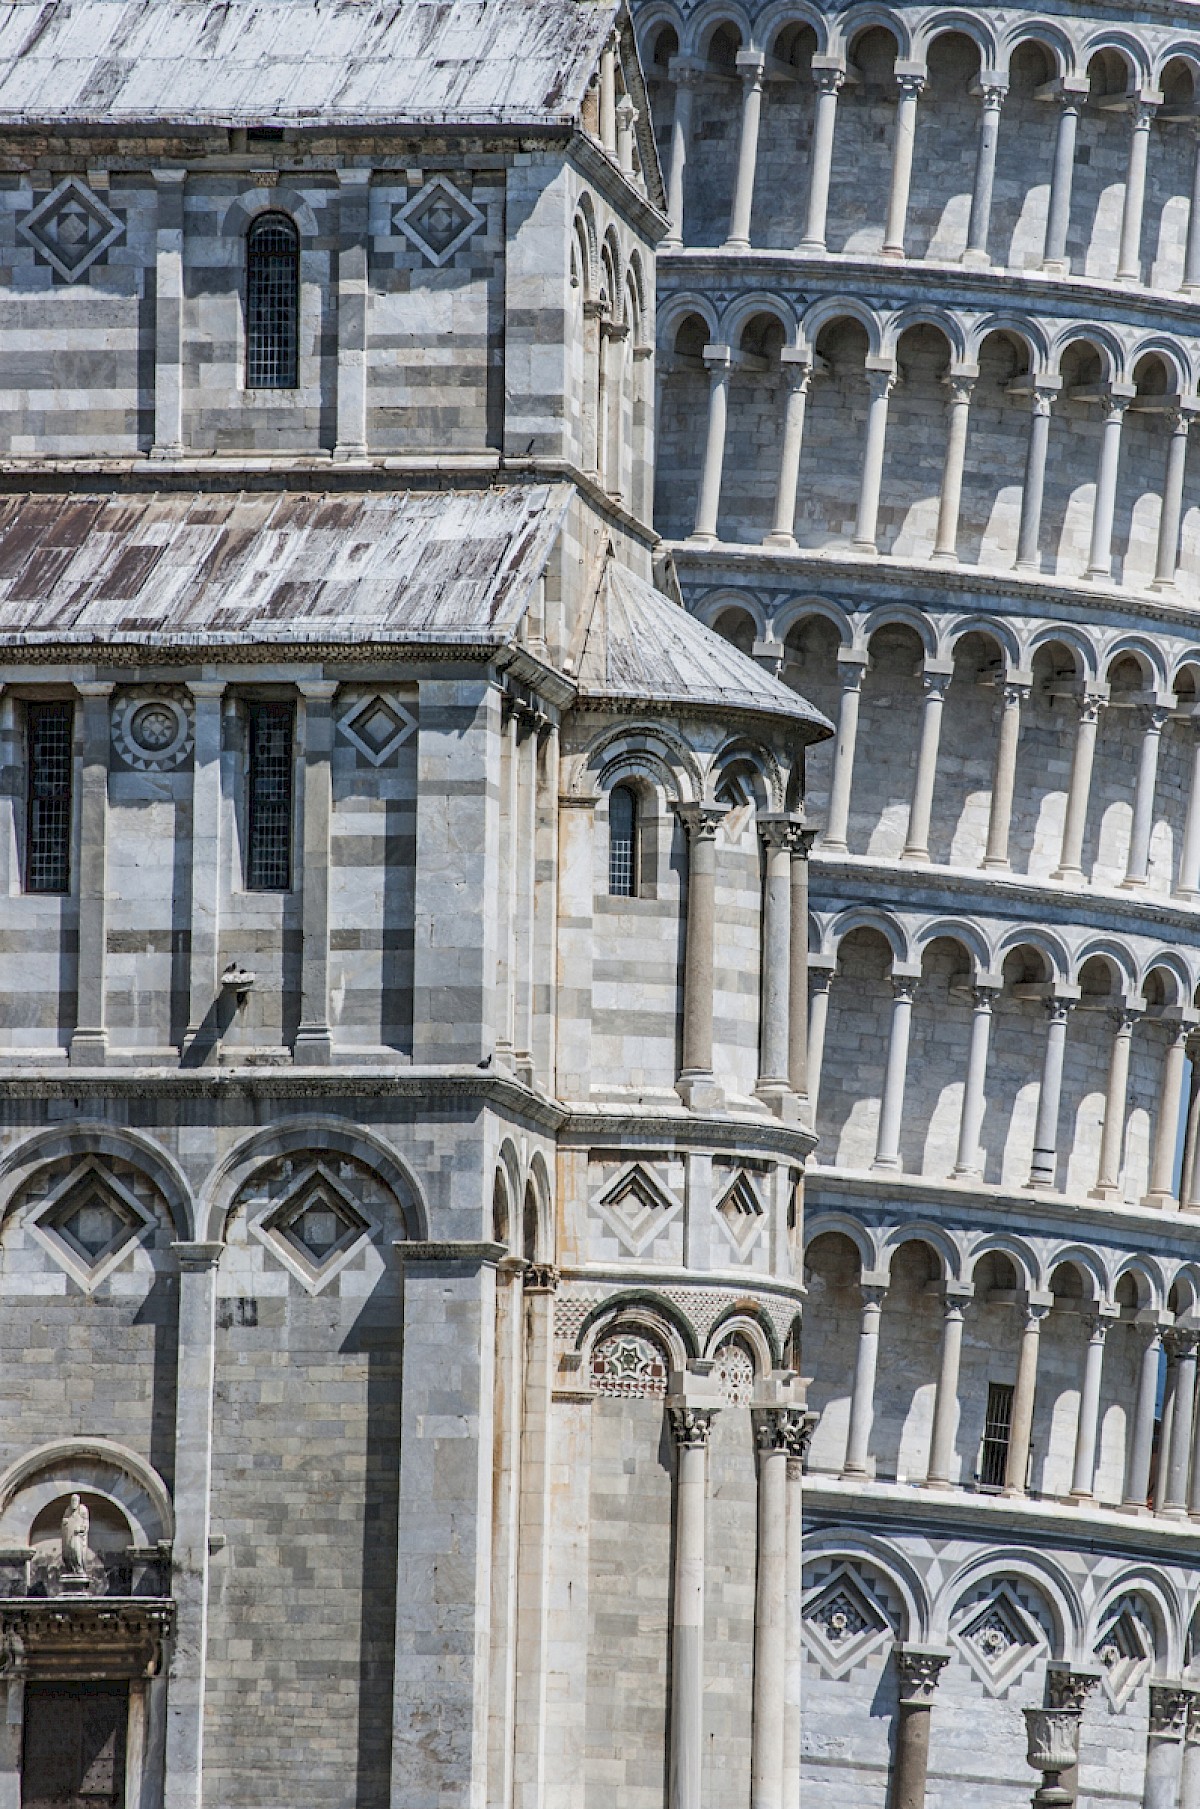 Leaning Tower of Pisa, additional view